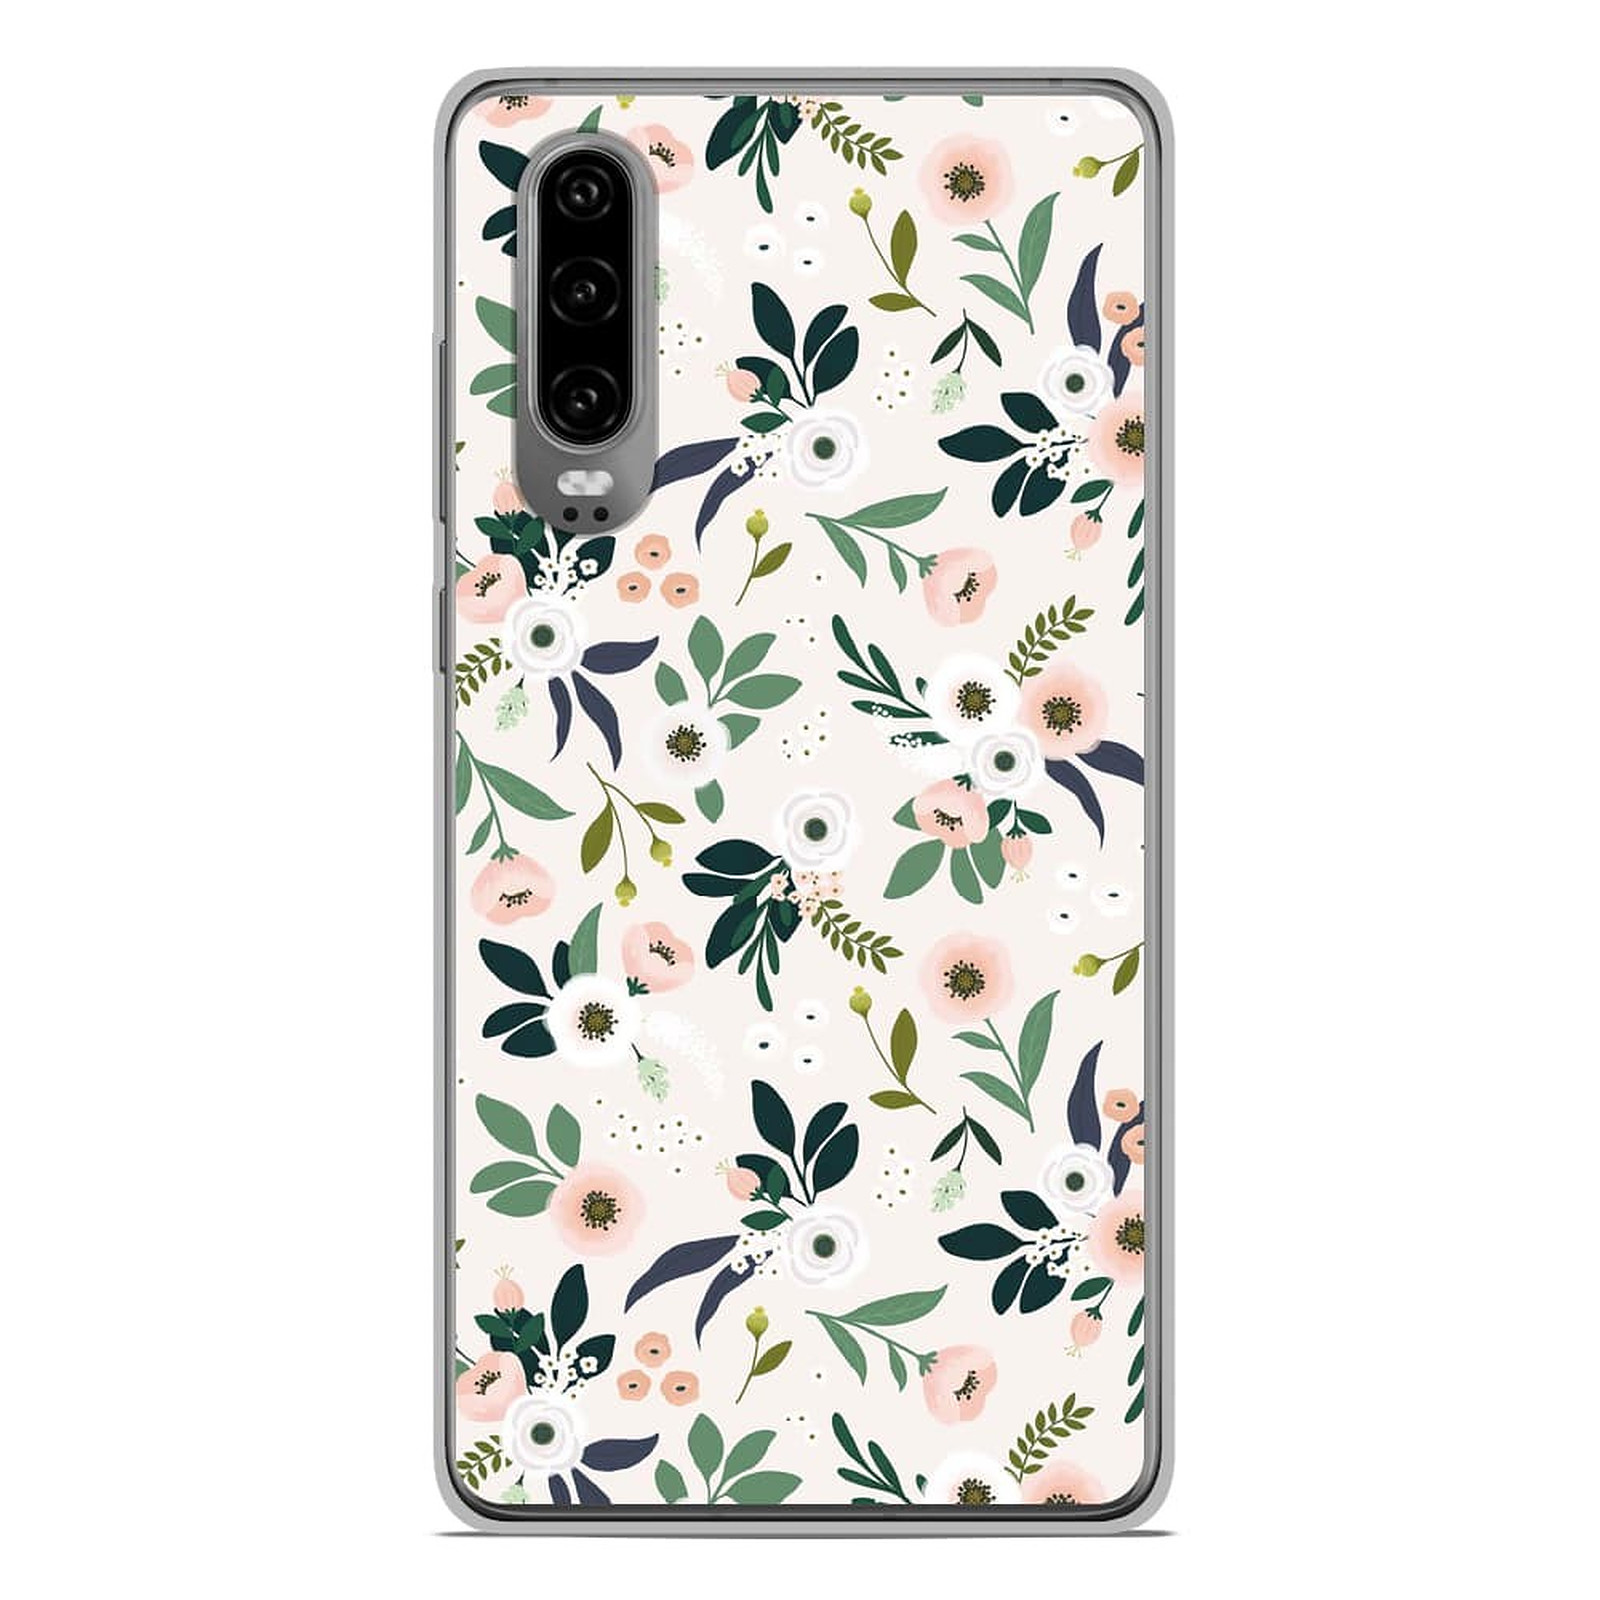 1001 Coques Coque silicone gel Huawei P30 motif Flowers - Coque telephone 1001Coques